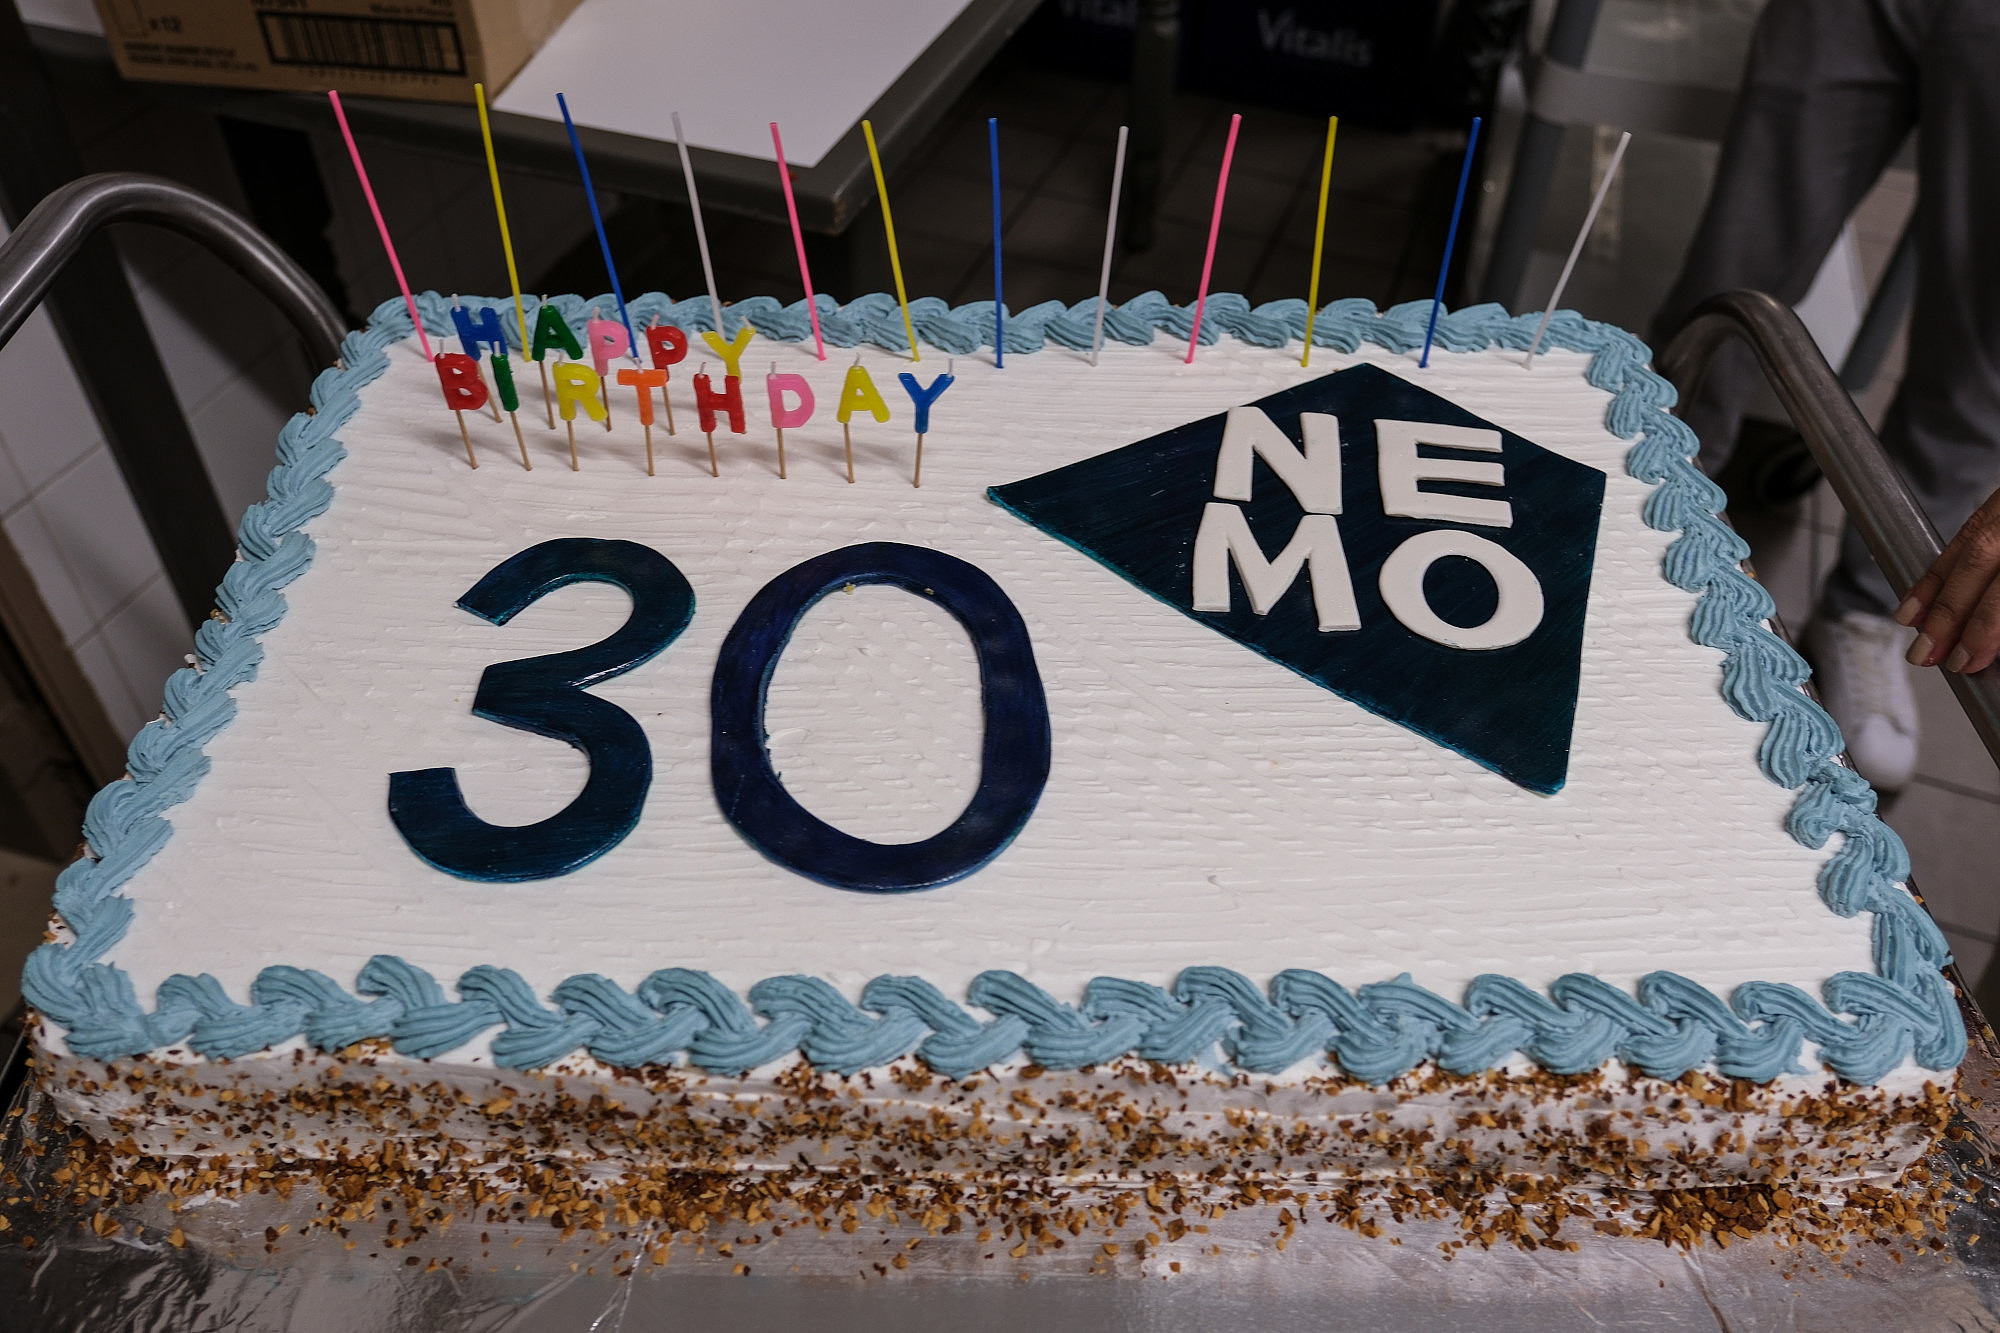 A birthday cake with blue and white icing and birthday candles. On the cake the words "NEMO" and "30" are written.  © Image: Jorge Gomes